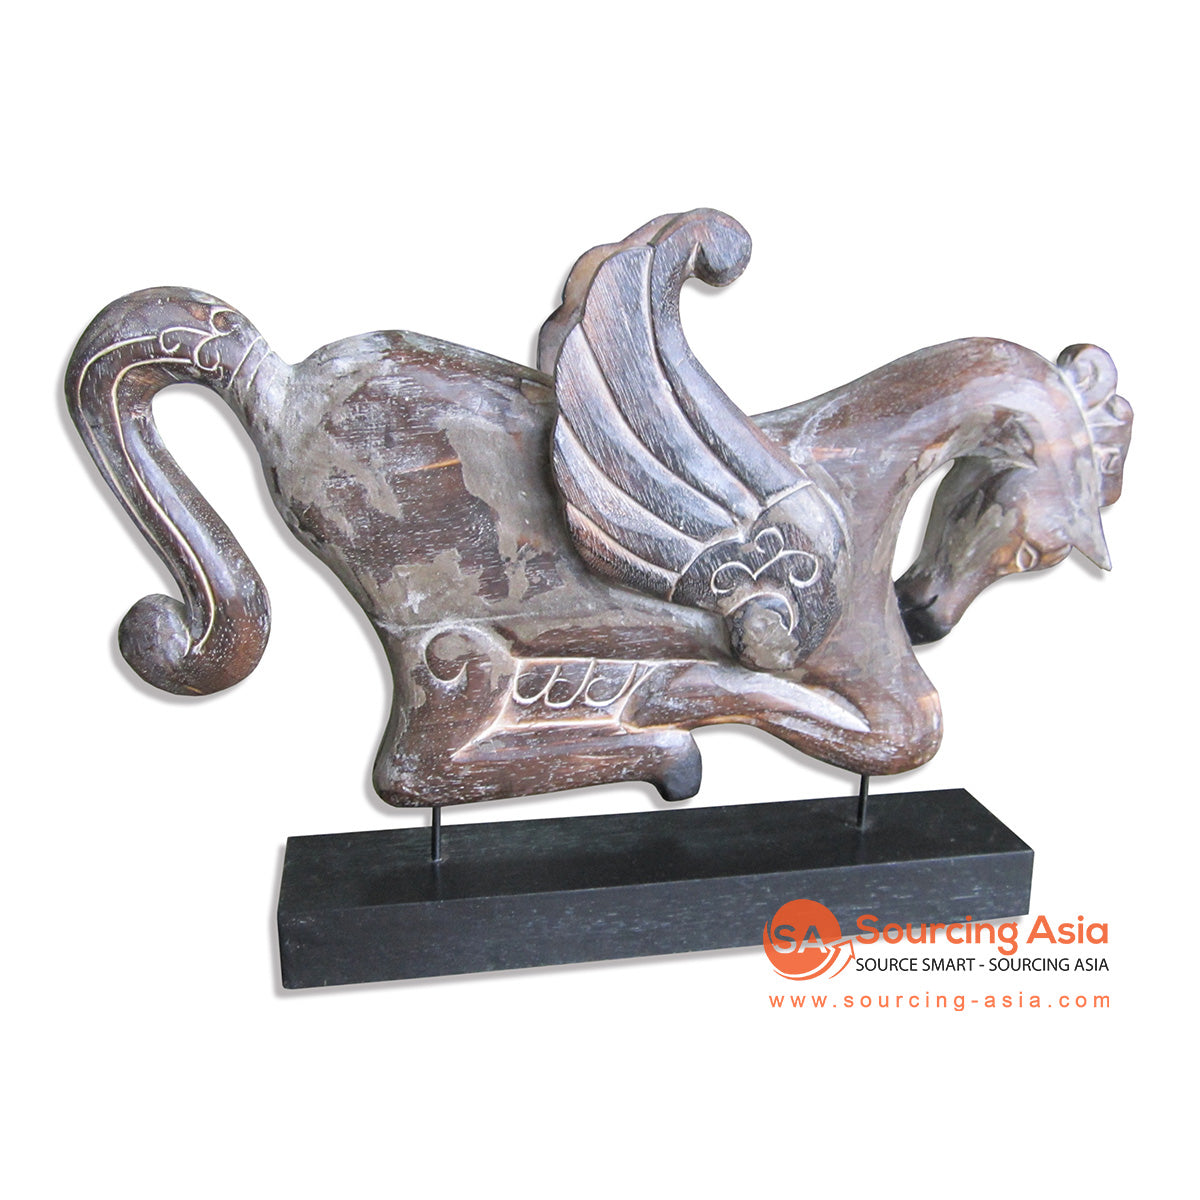 ISUL155-D DARK WOODEN FLYING HORSE ON STAND DECORATION